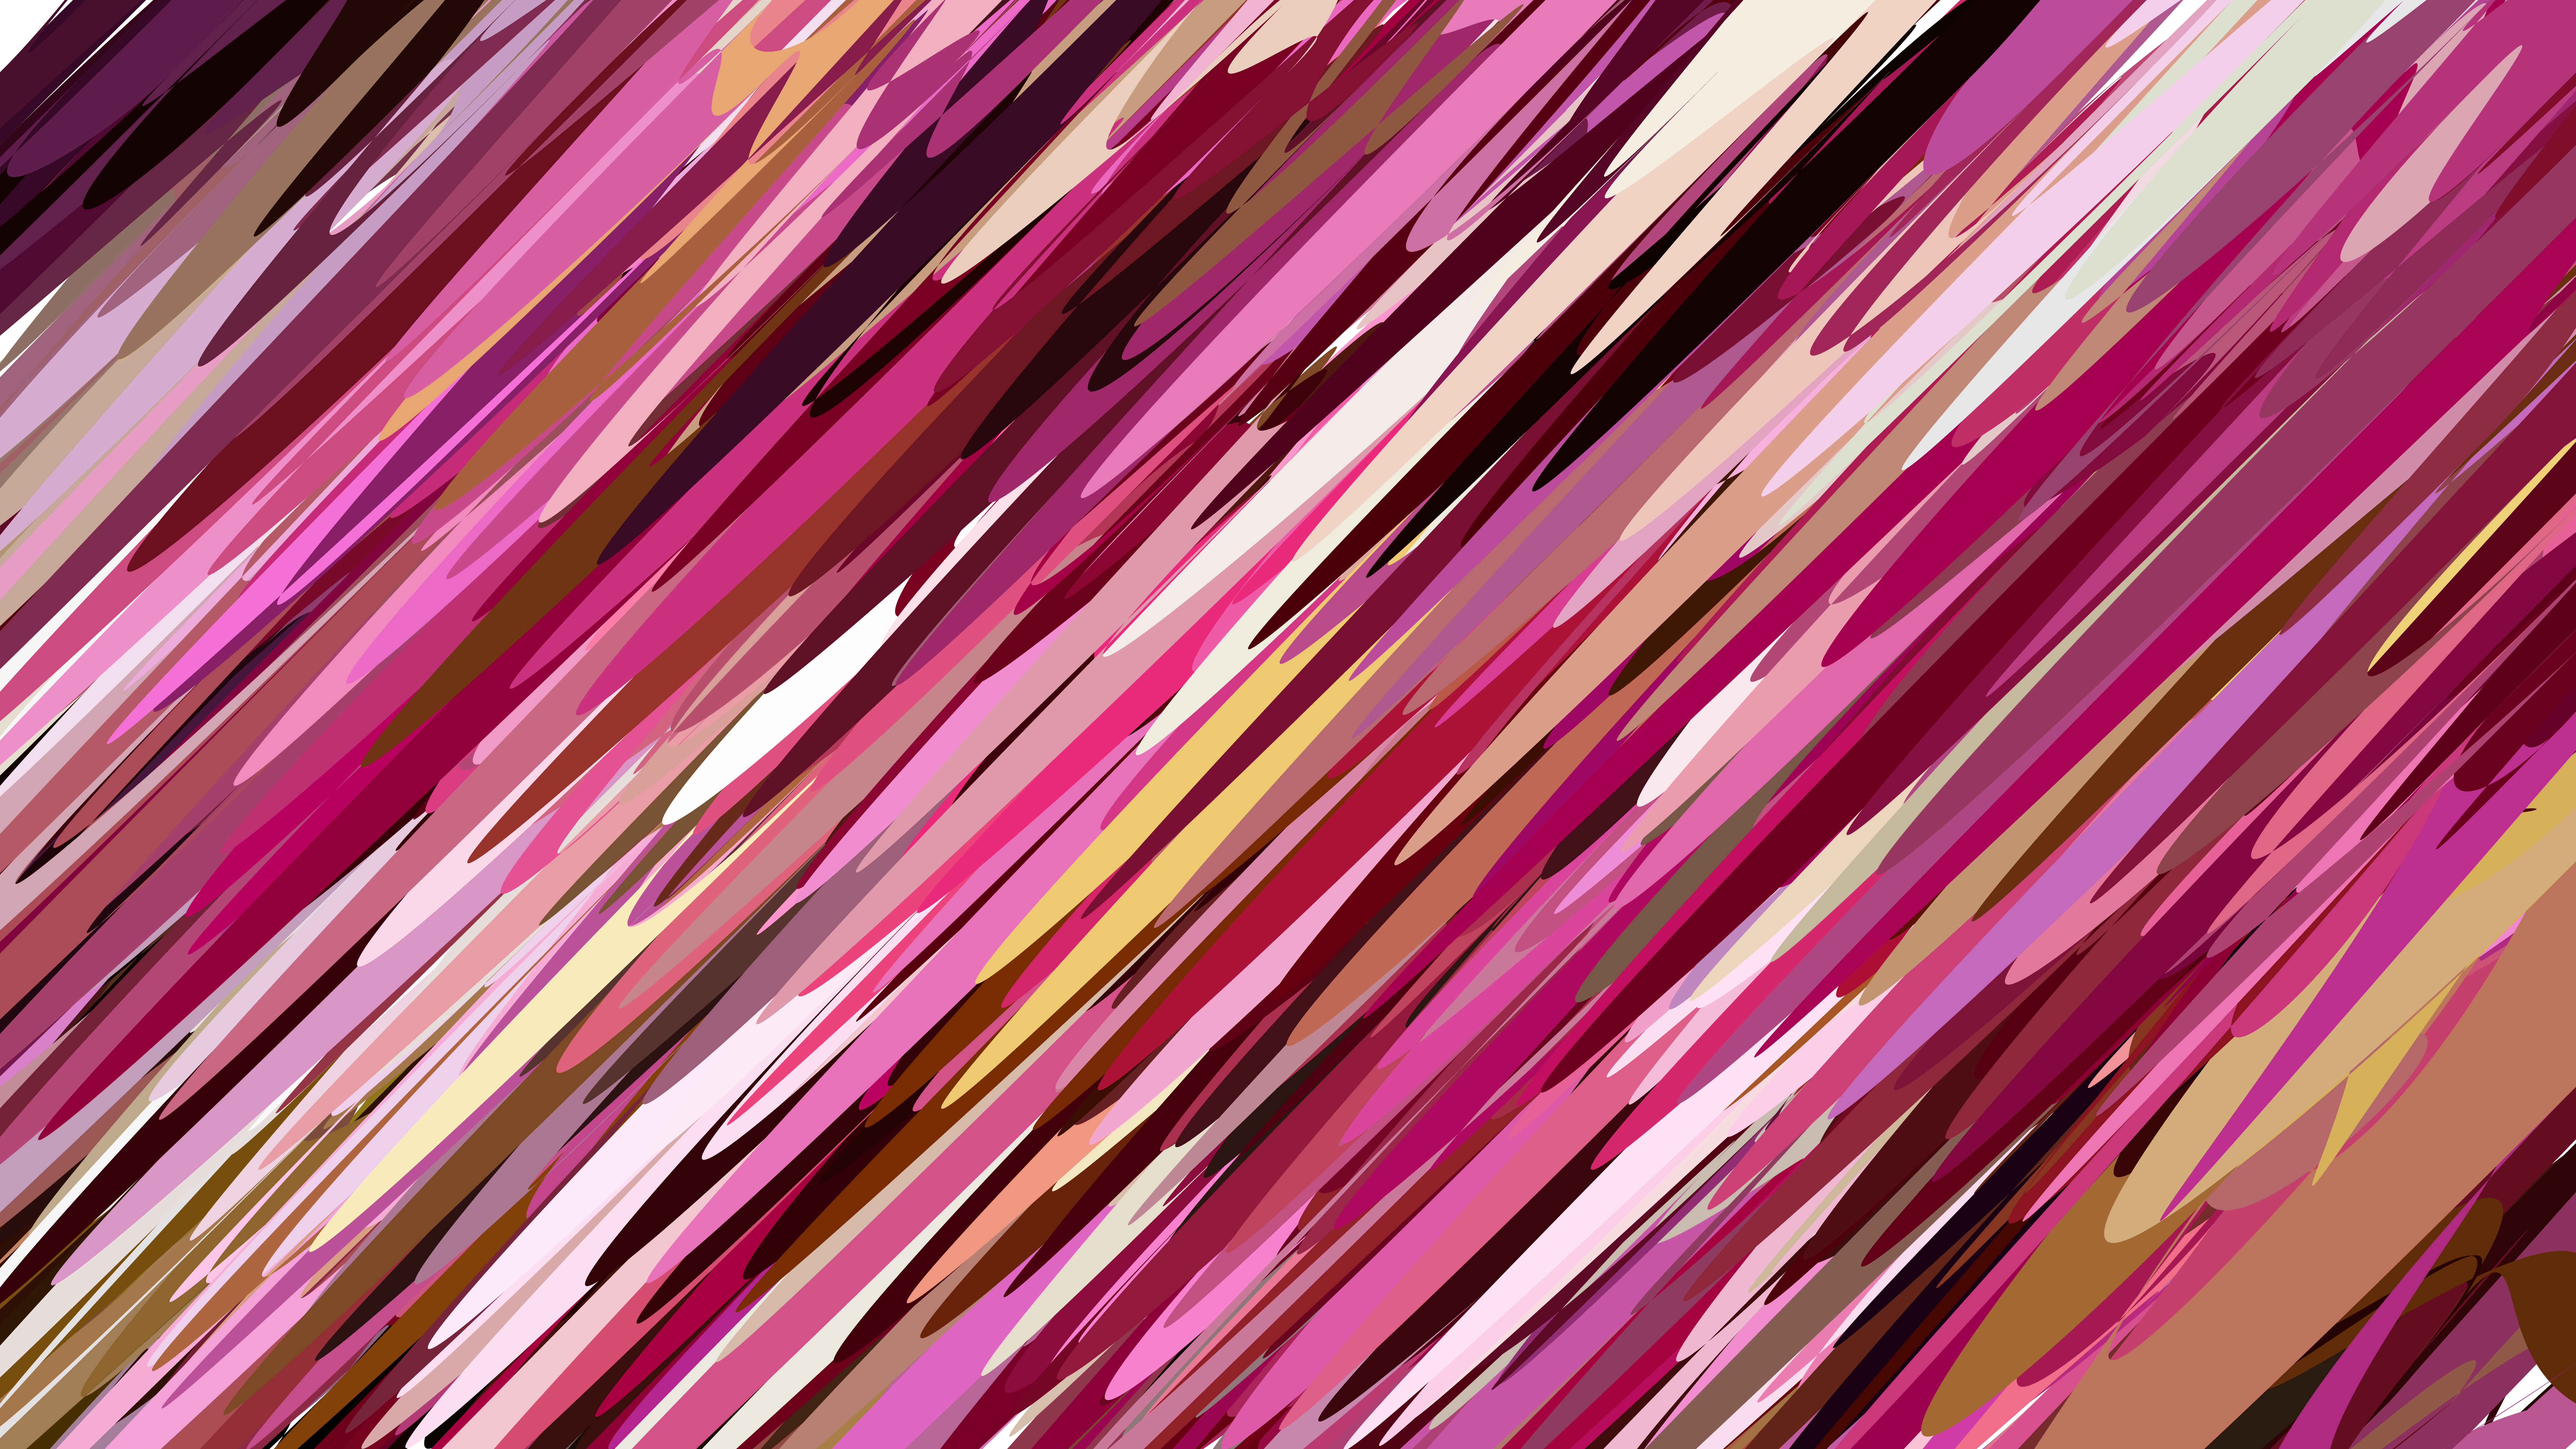 Free Abstract Pink Black and White Texture Background